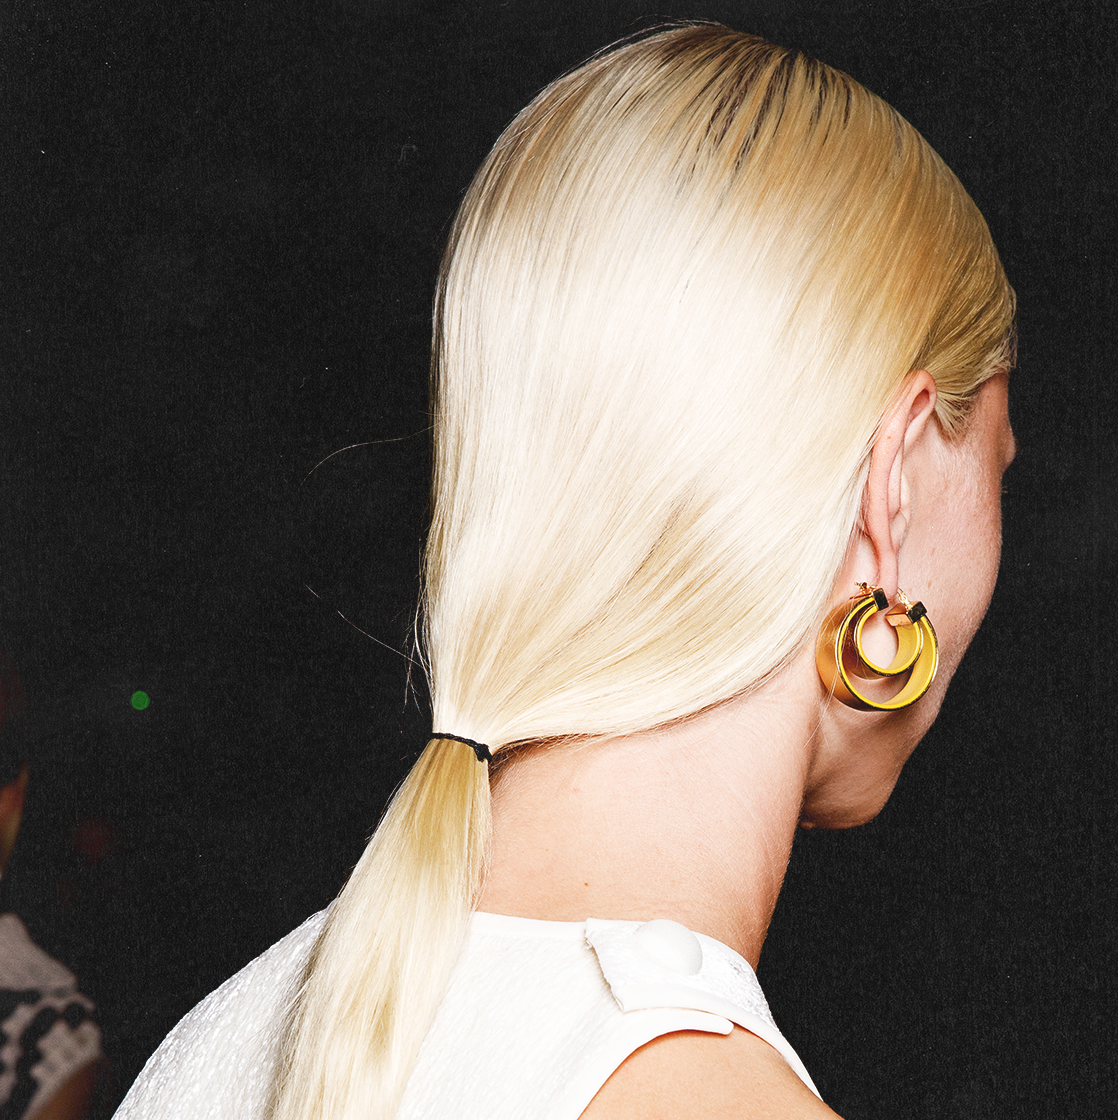 Trying to Dye Your Blonde Hair at Home? We Gotchu Covered